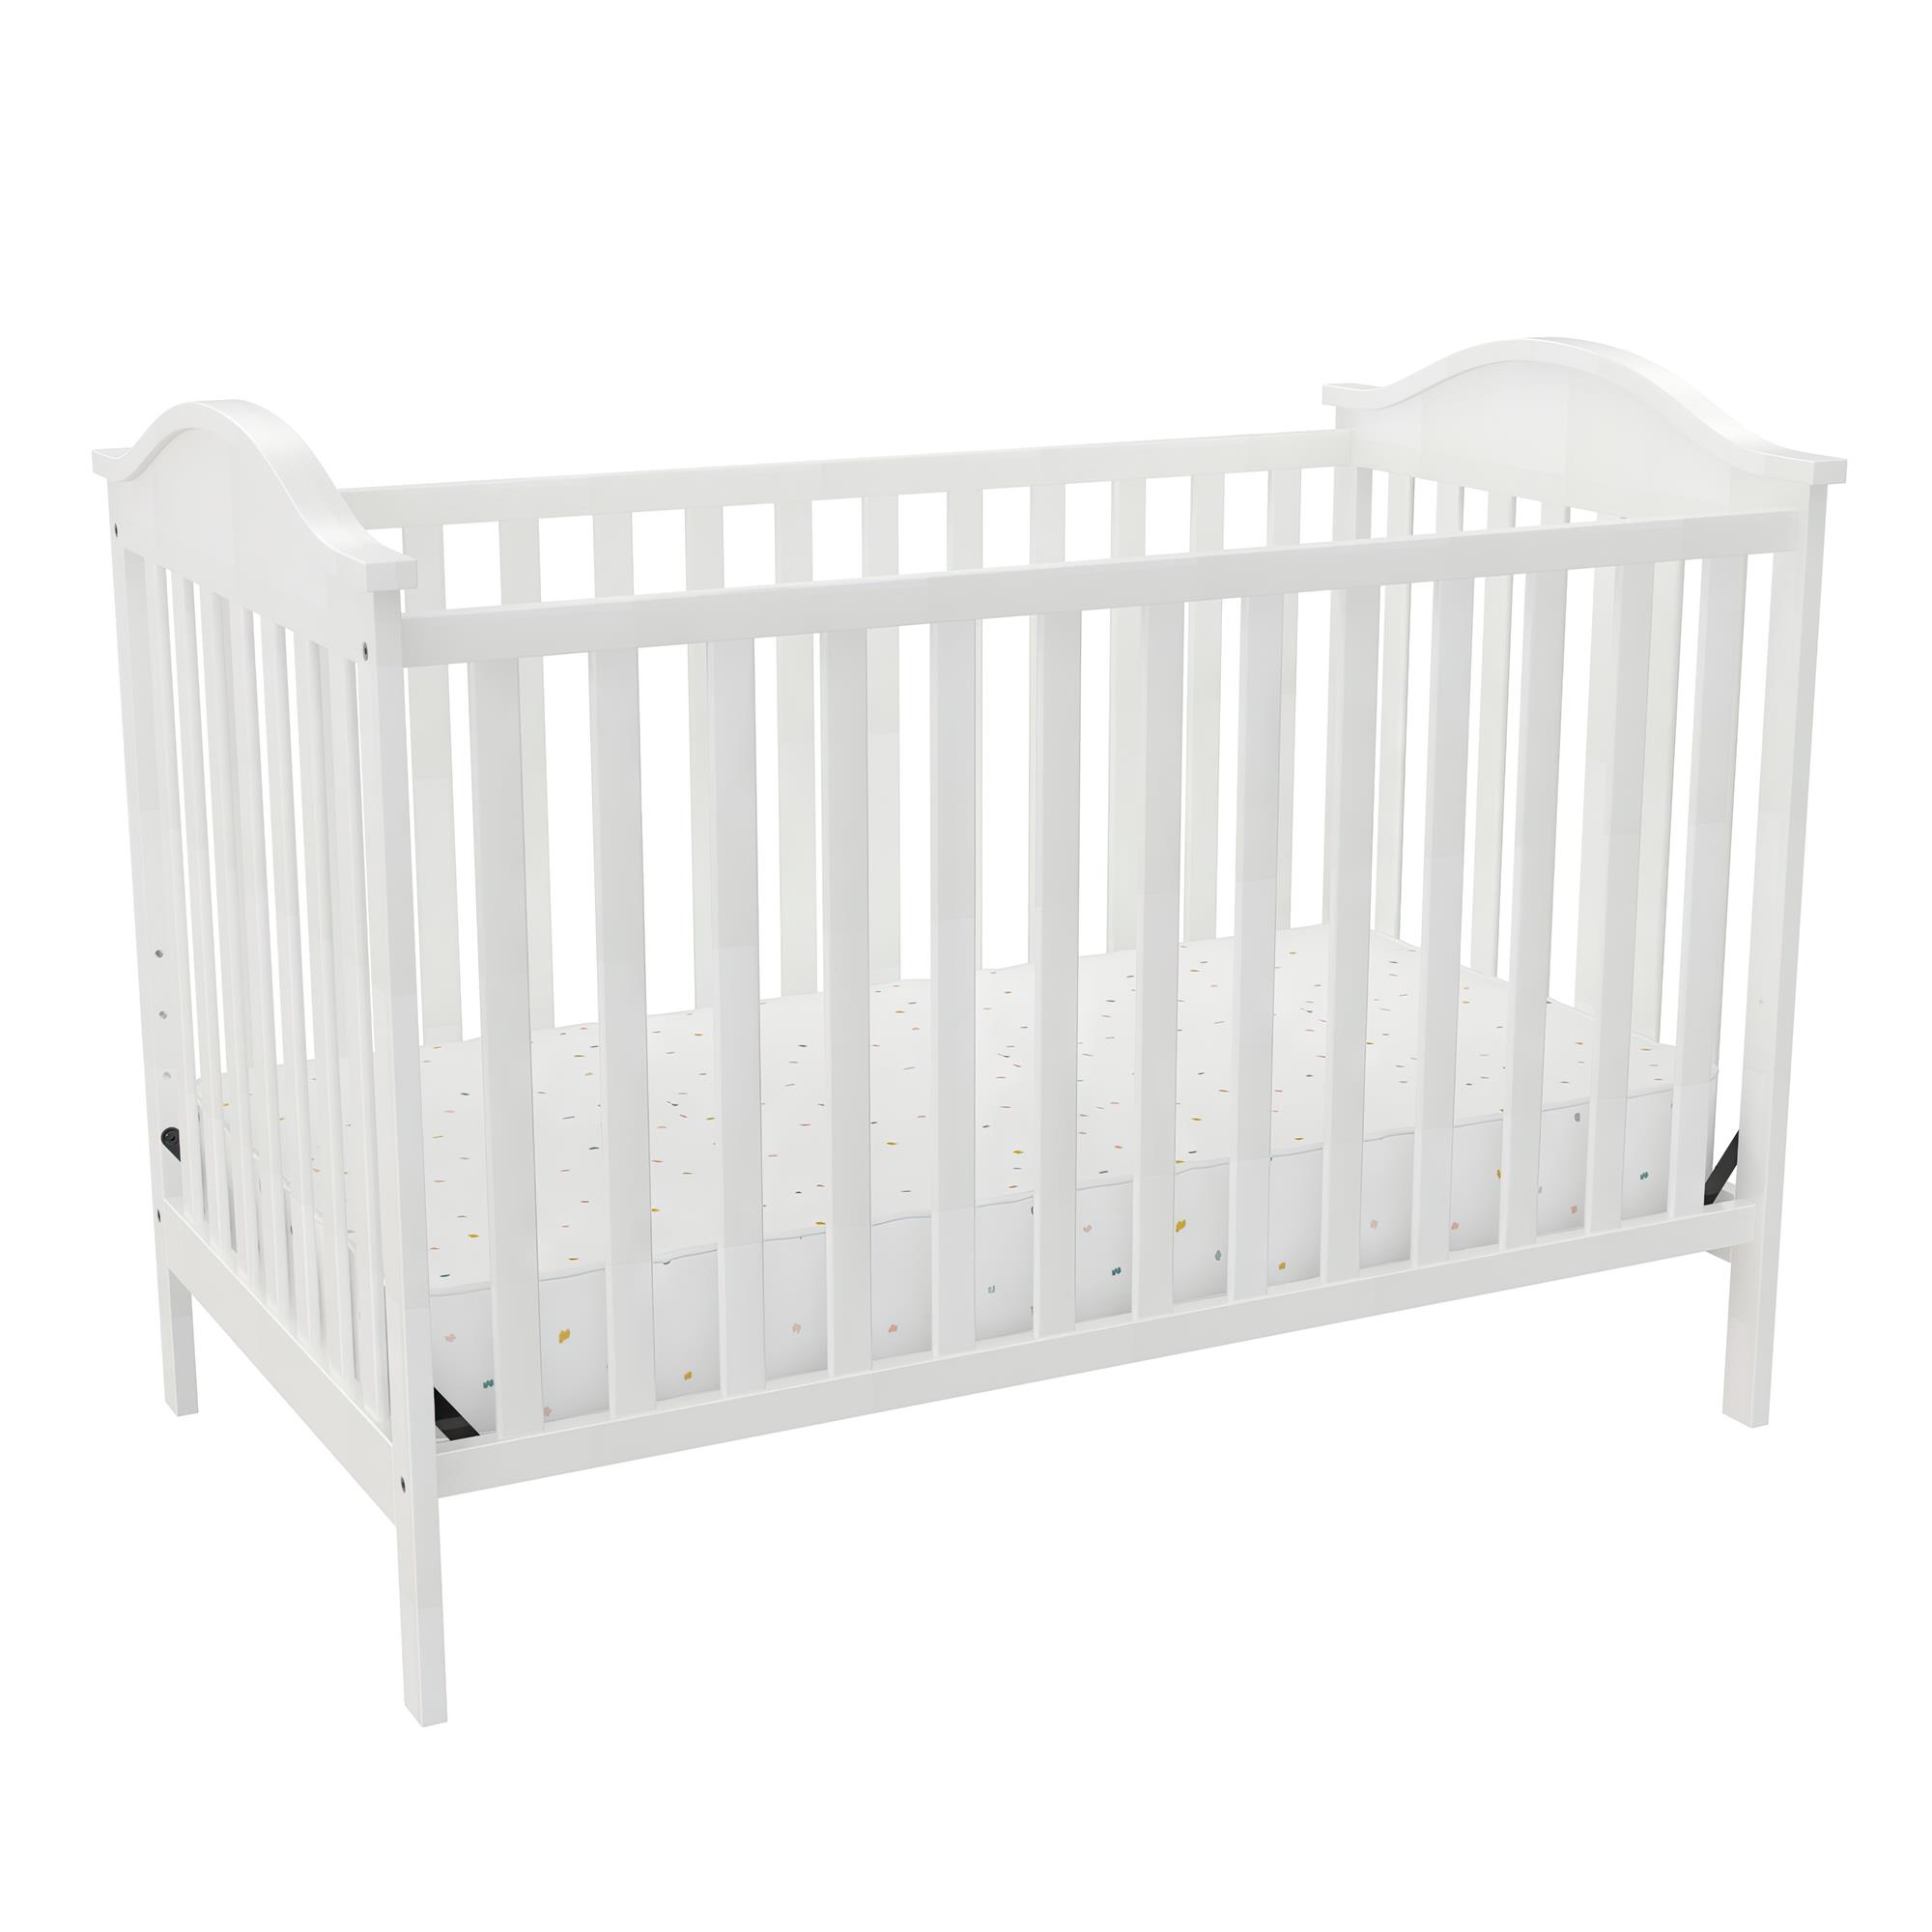 Baby Relax Adele 3-in-1 Convertible Crib, White - image 1 of 14